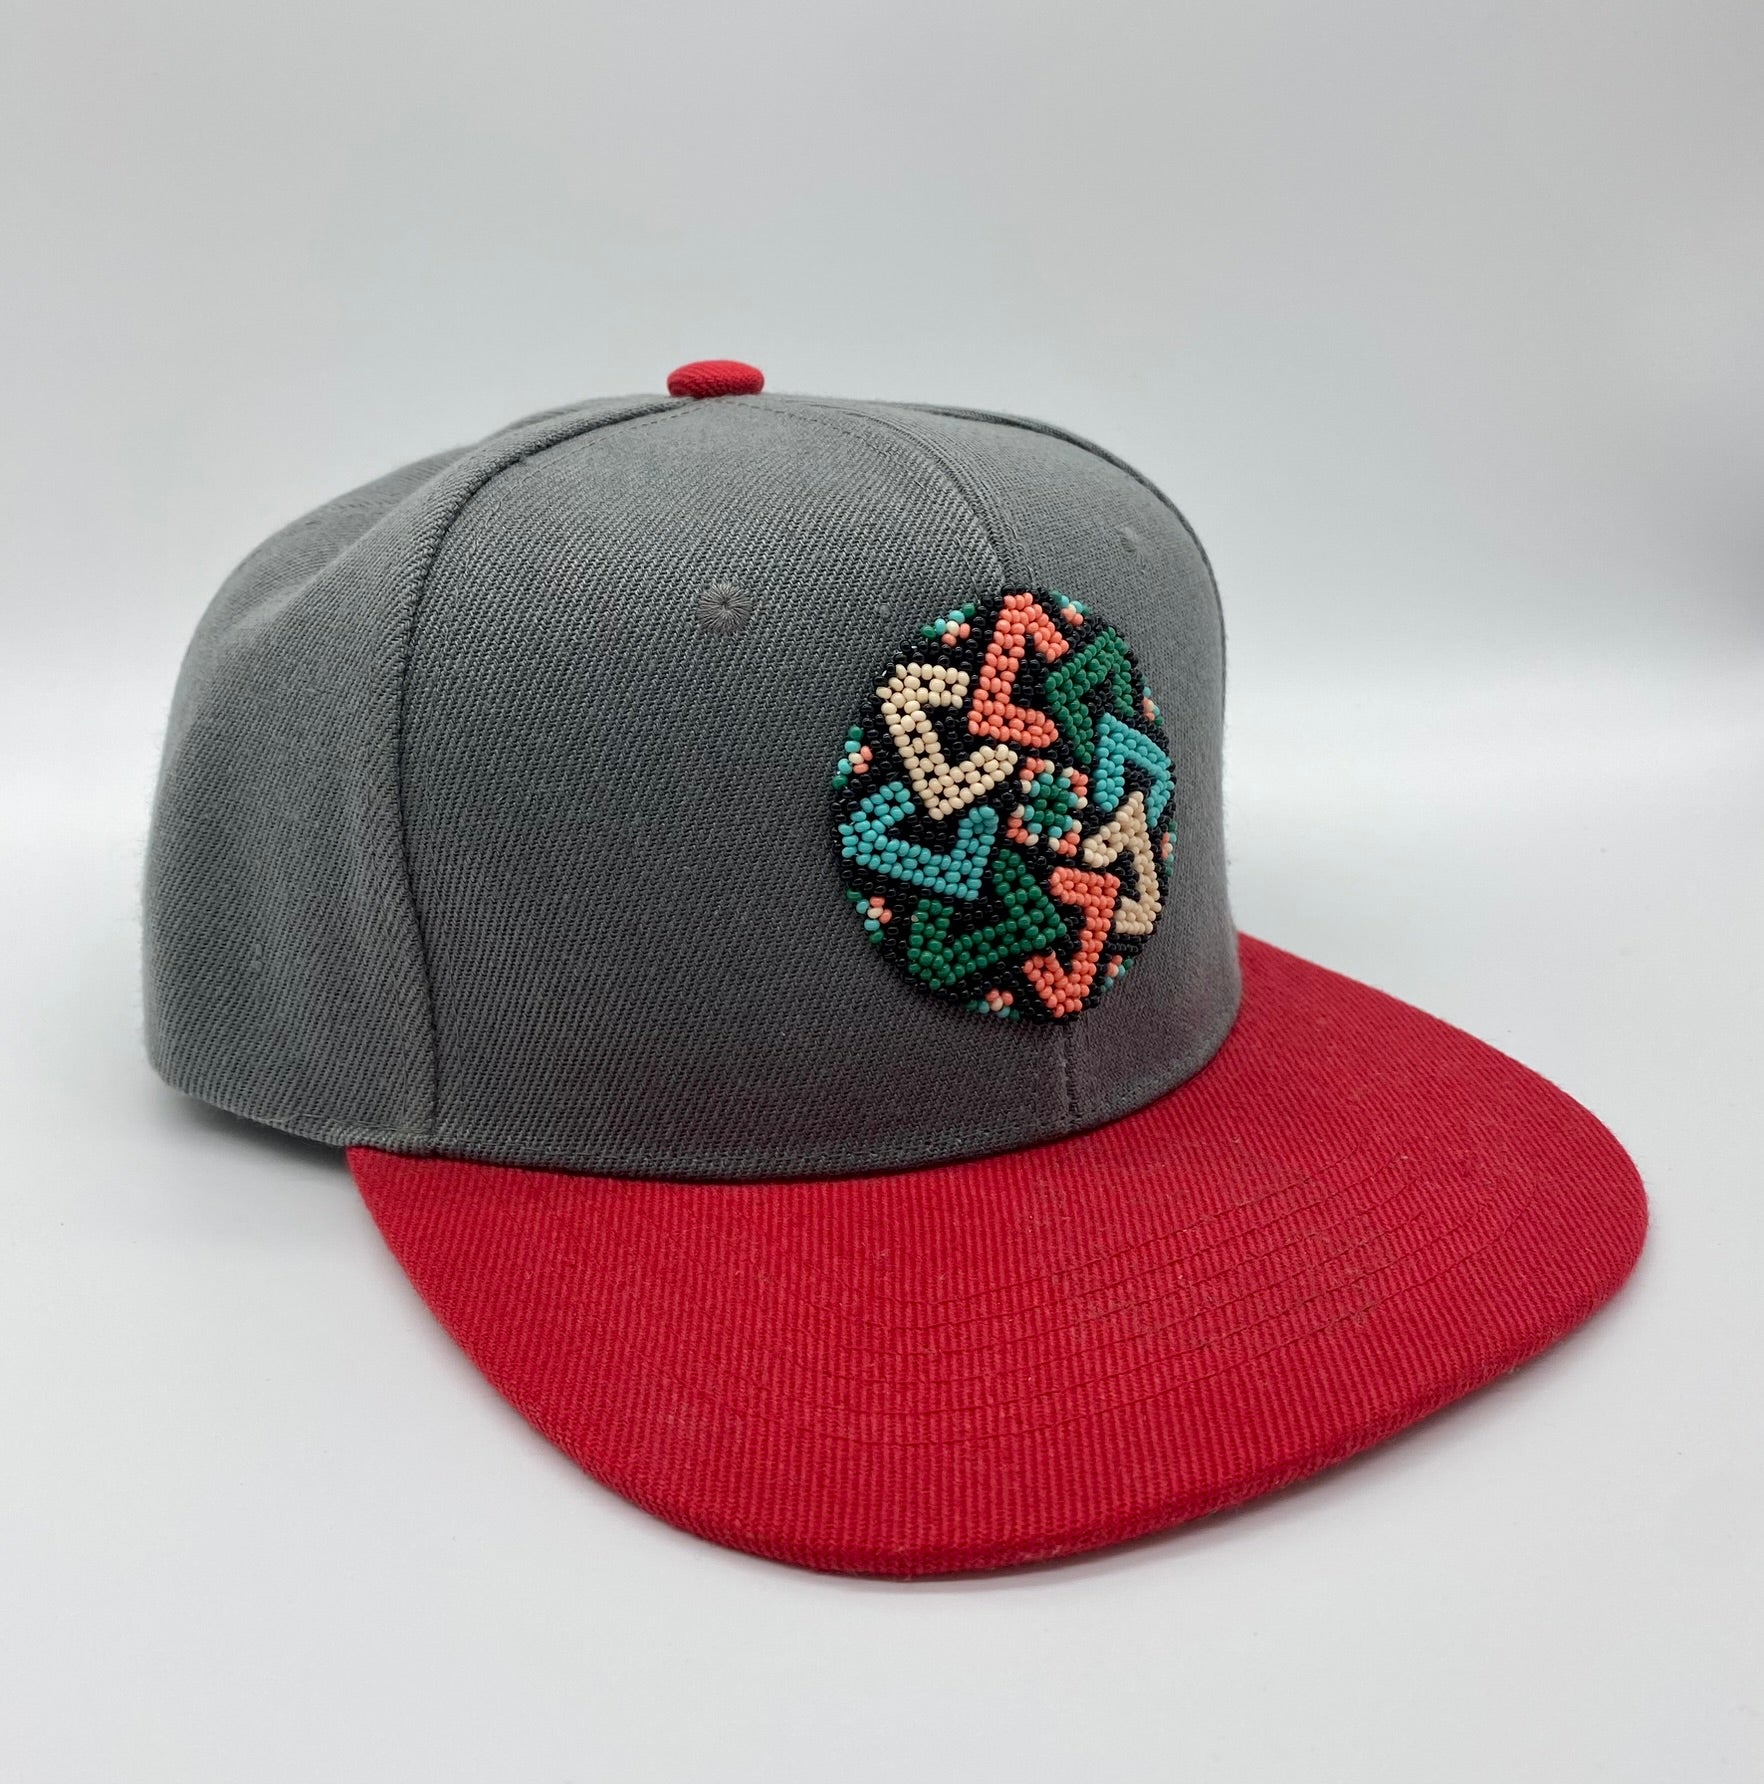 Amazing Handcrafted Hat - Corazón Clothing